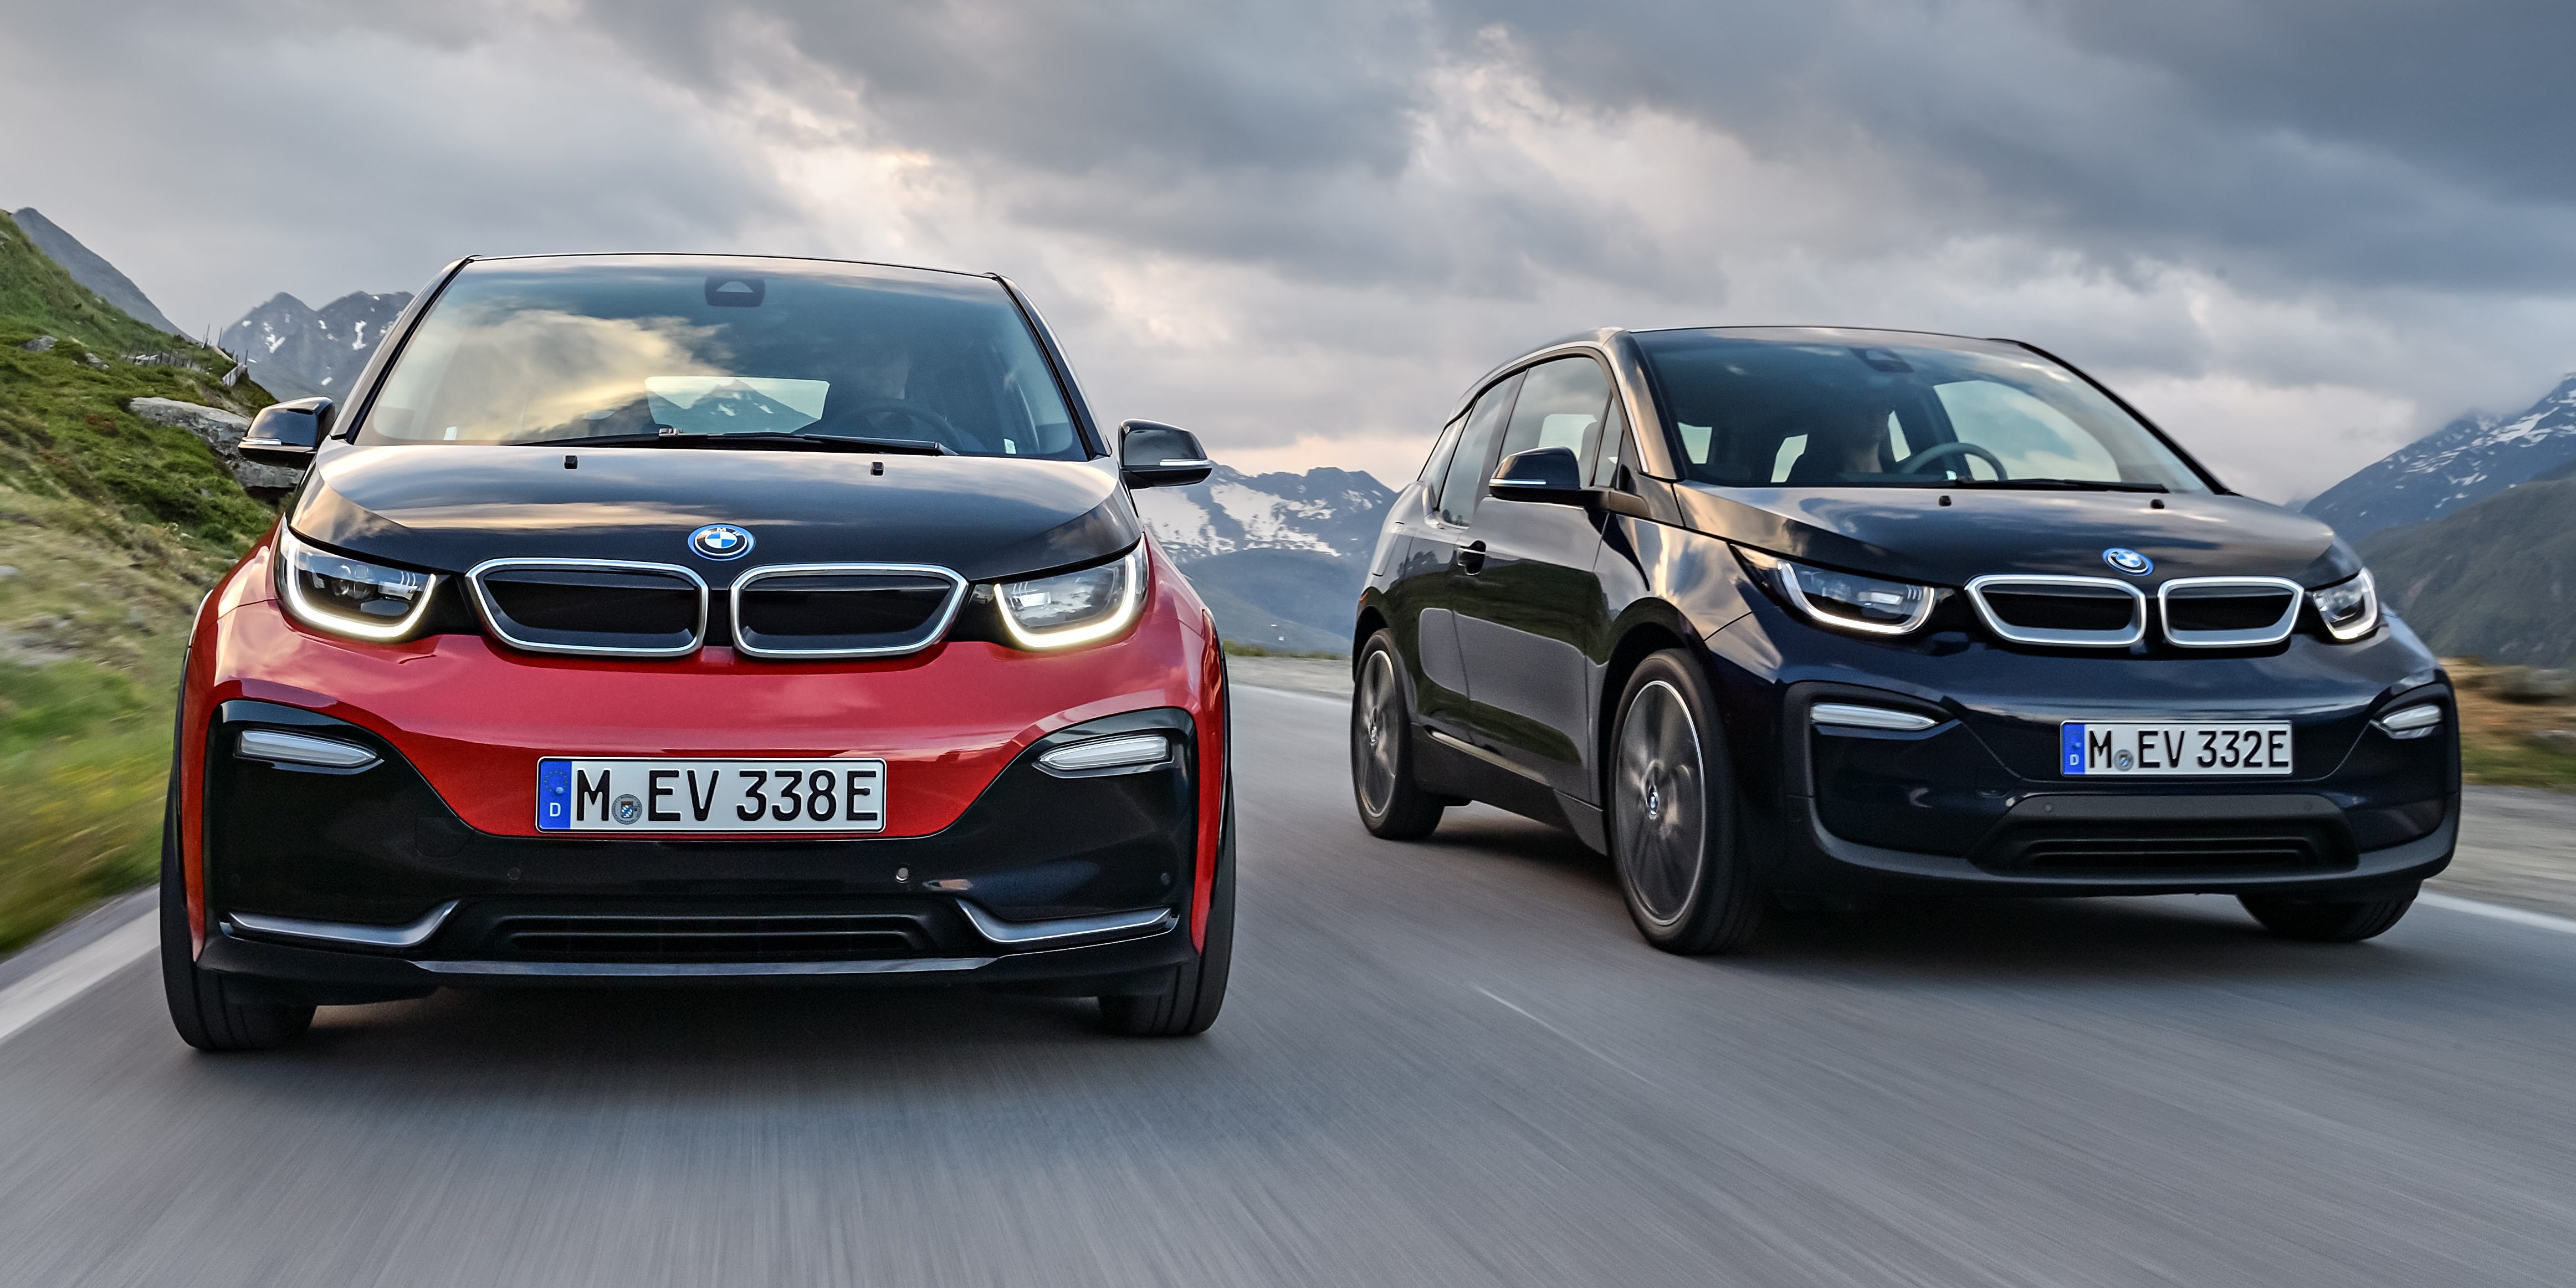 2018 BMW i3 unveiled with small design refresh and new sport package